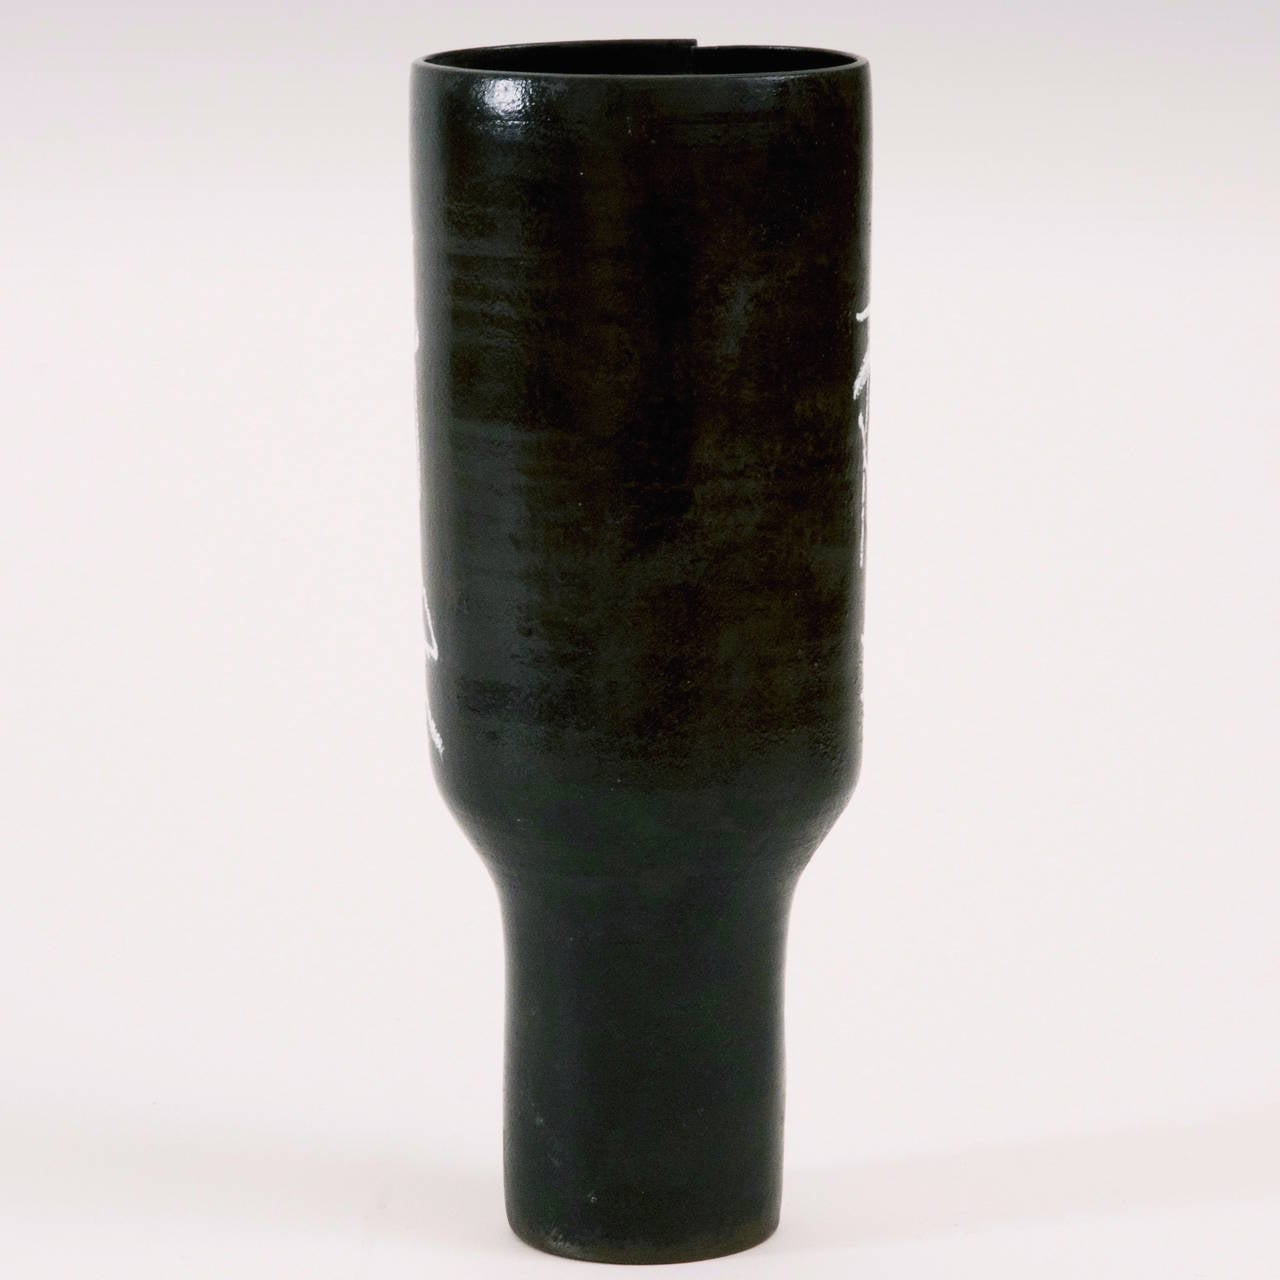 Glazed Ceramic Vase Modeled by Dalo and Decorated by Grégoire Devin